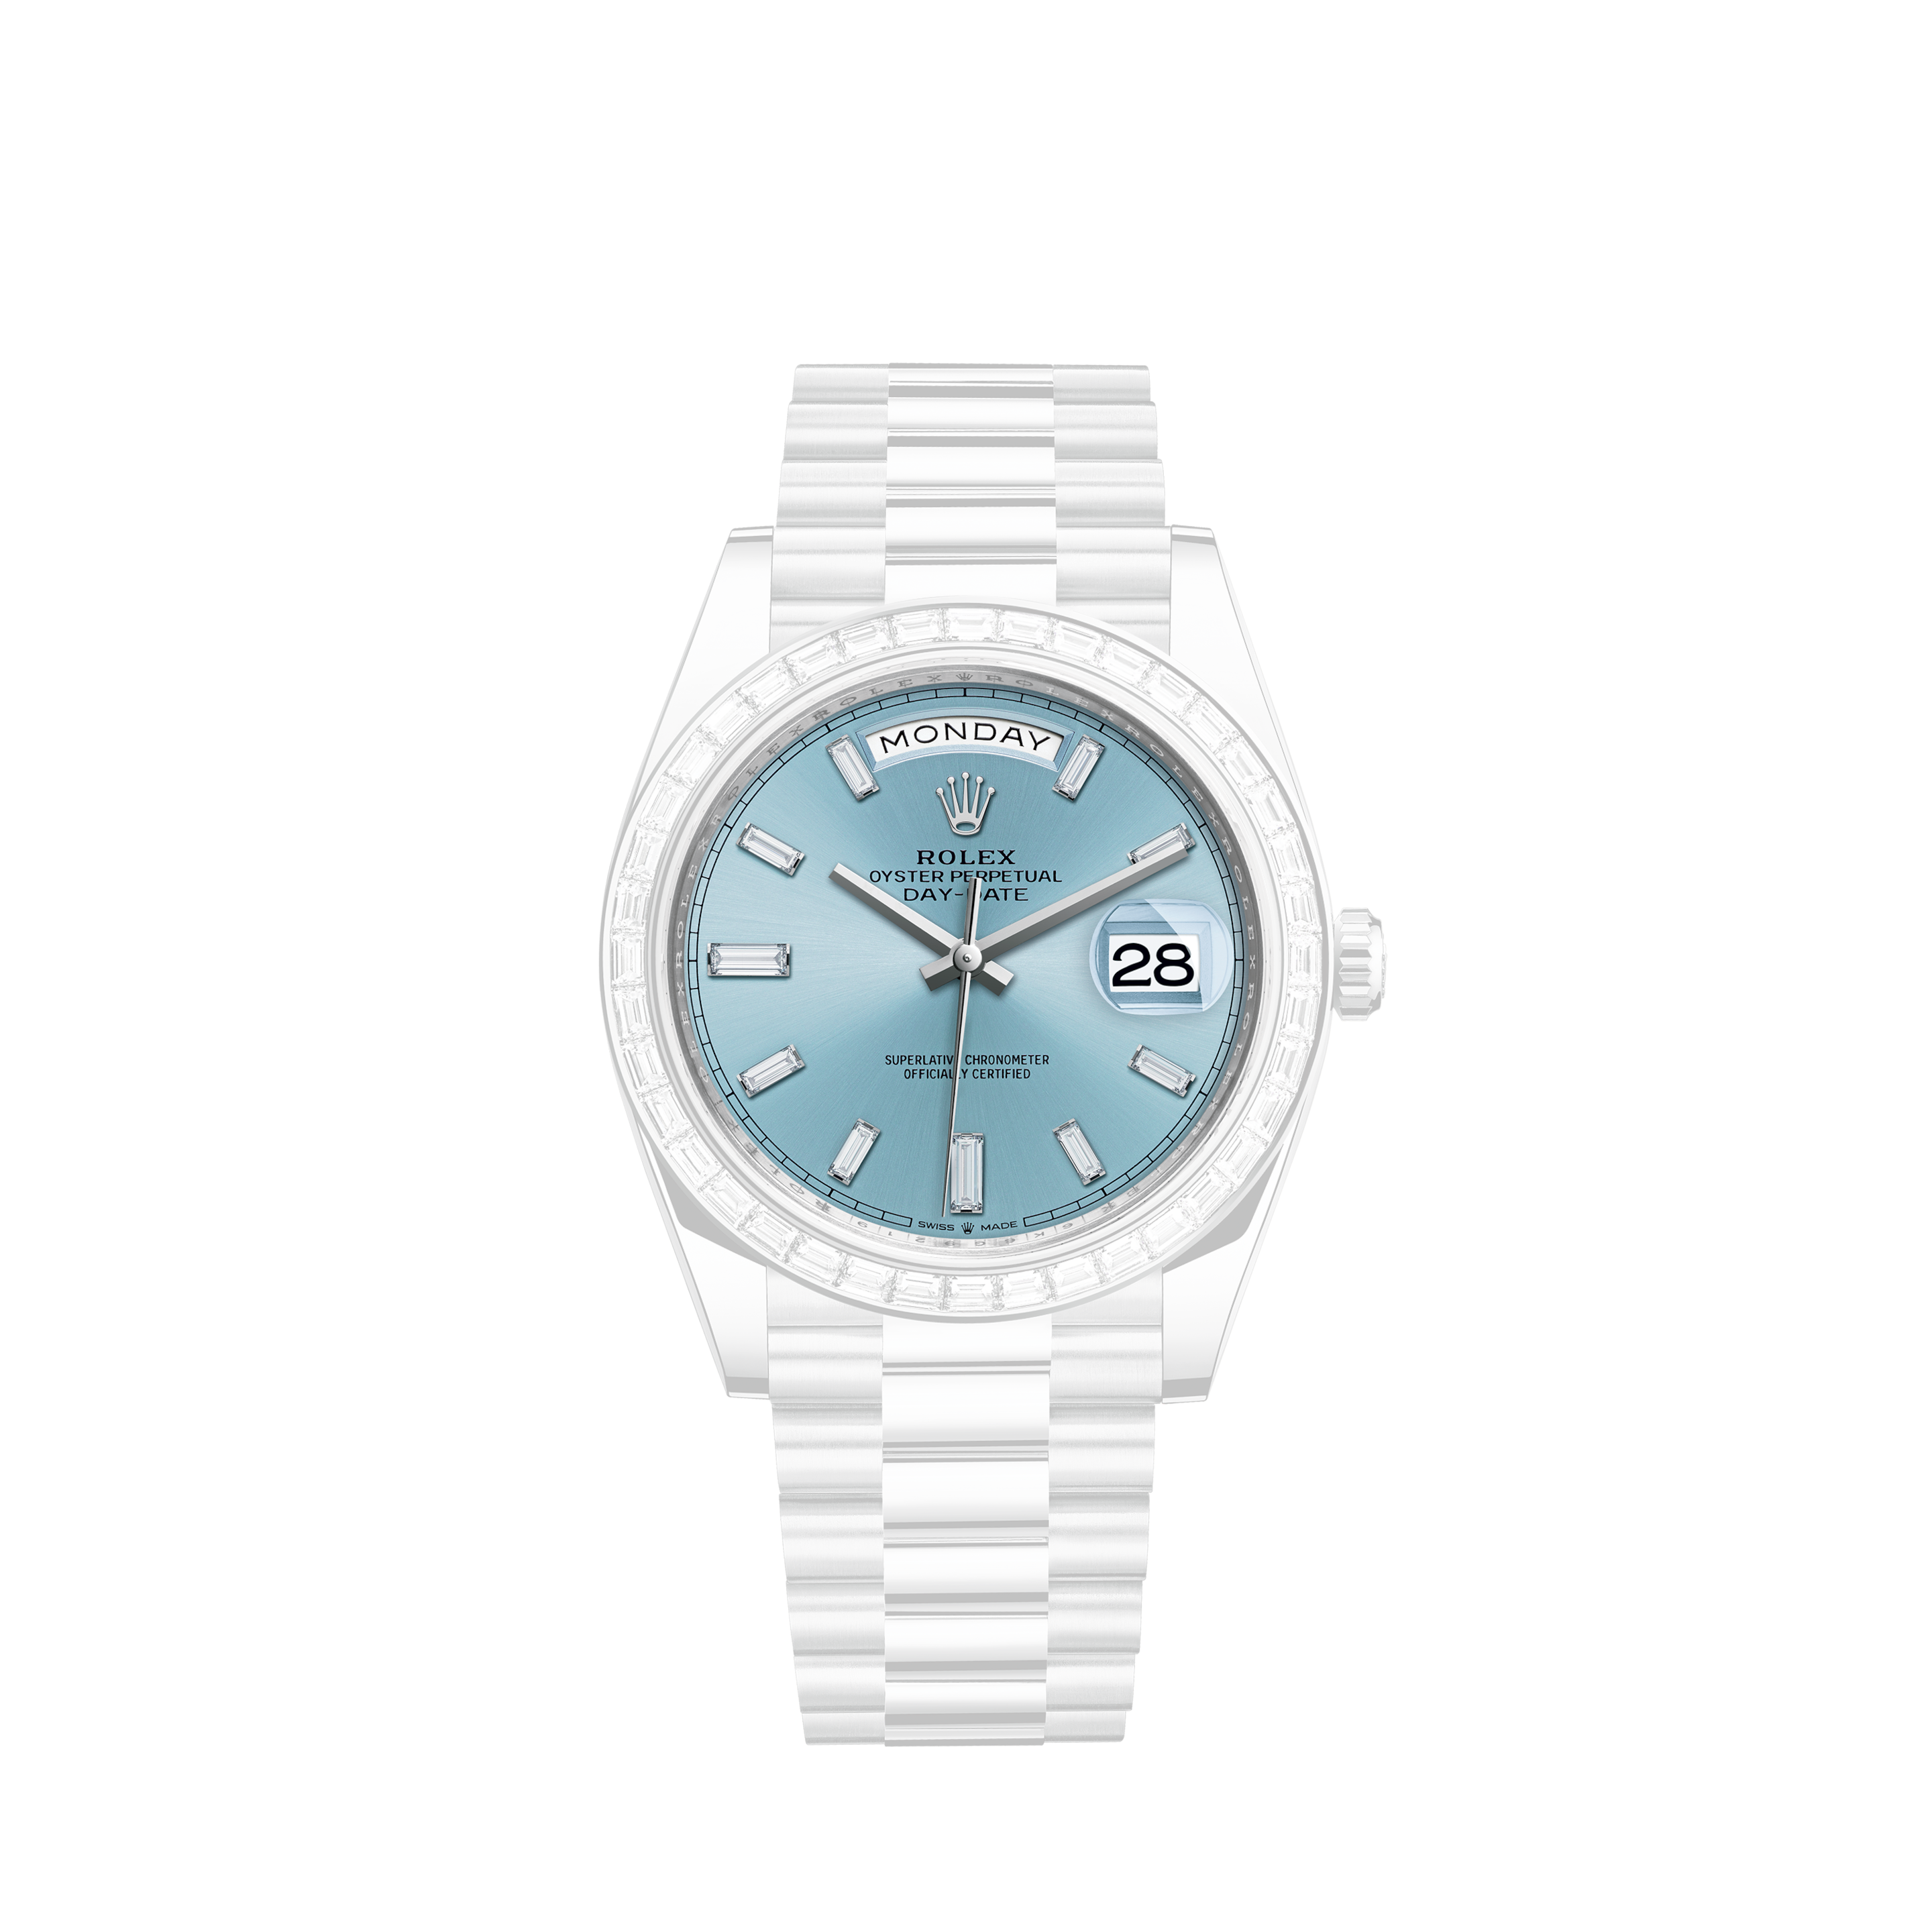 Rolex Datejust 41 Steel and White Gold - Fluted Bezel - Jubilee 126334 BKDJRolex Datejust 41 Steel and White Gold - Fluted Bezel - Jubilee 126334 BKIJ